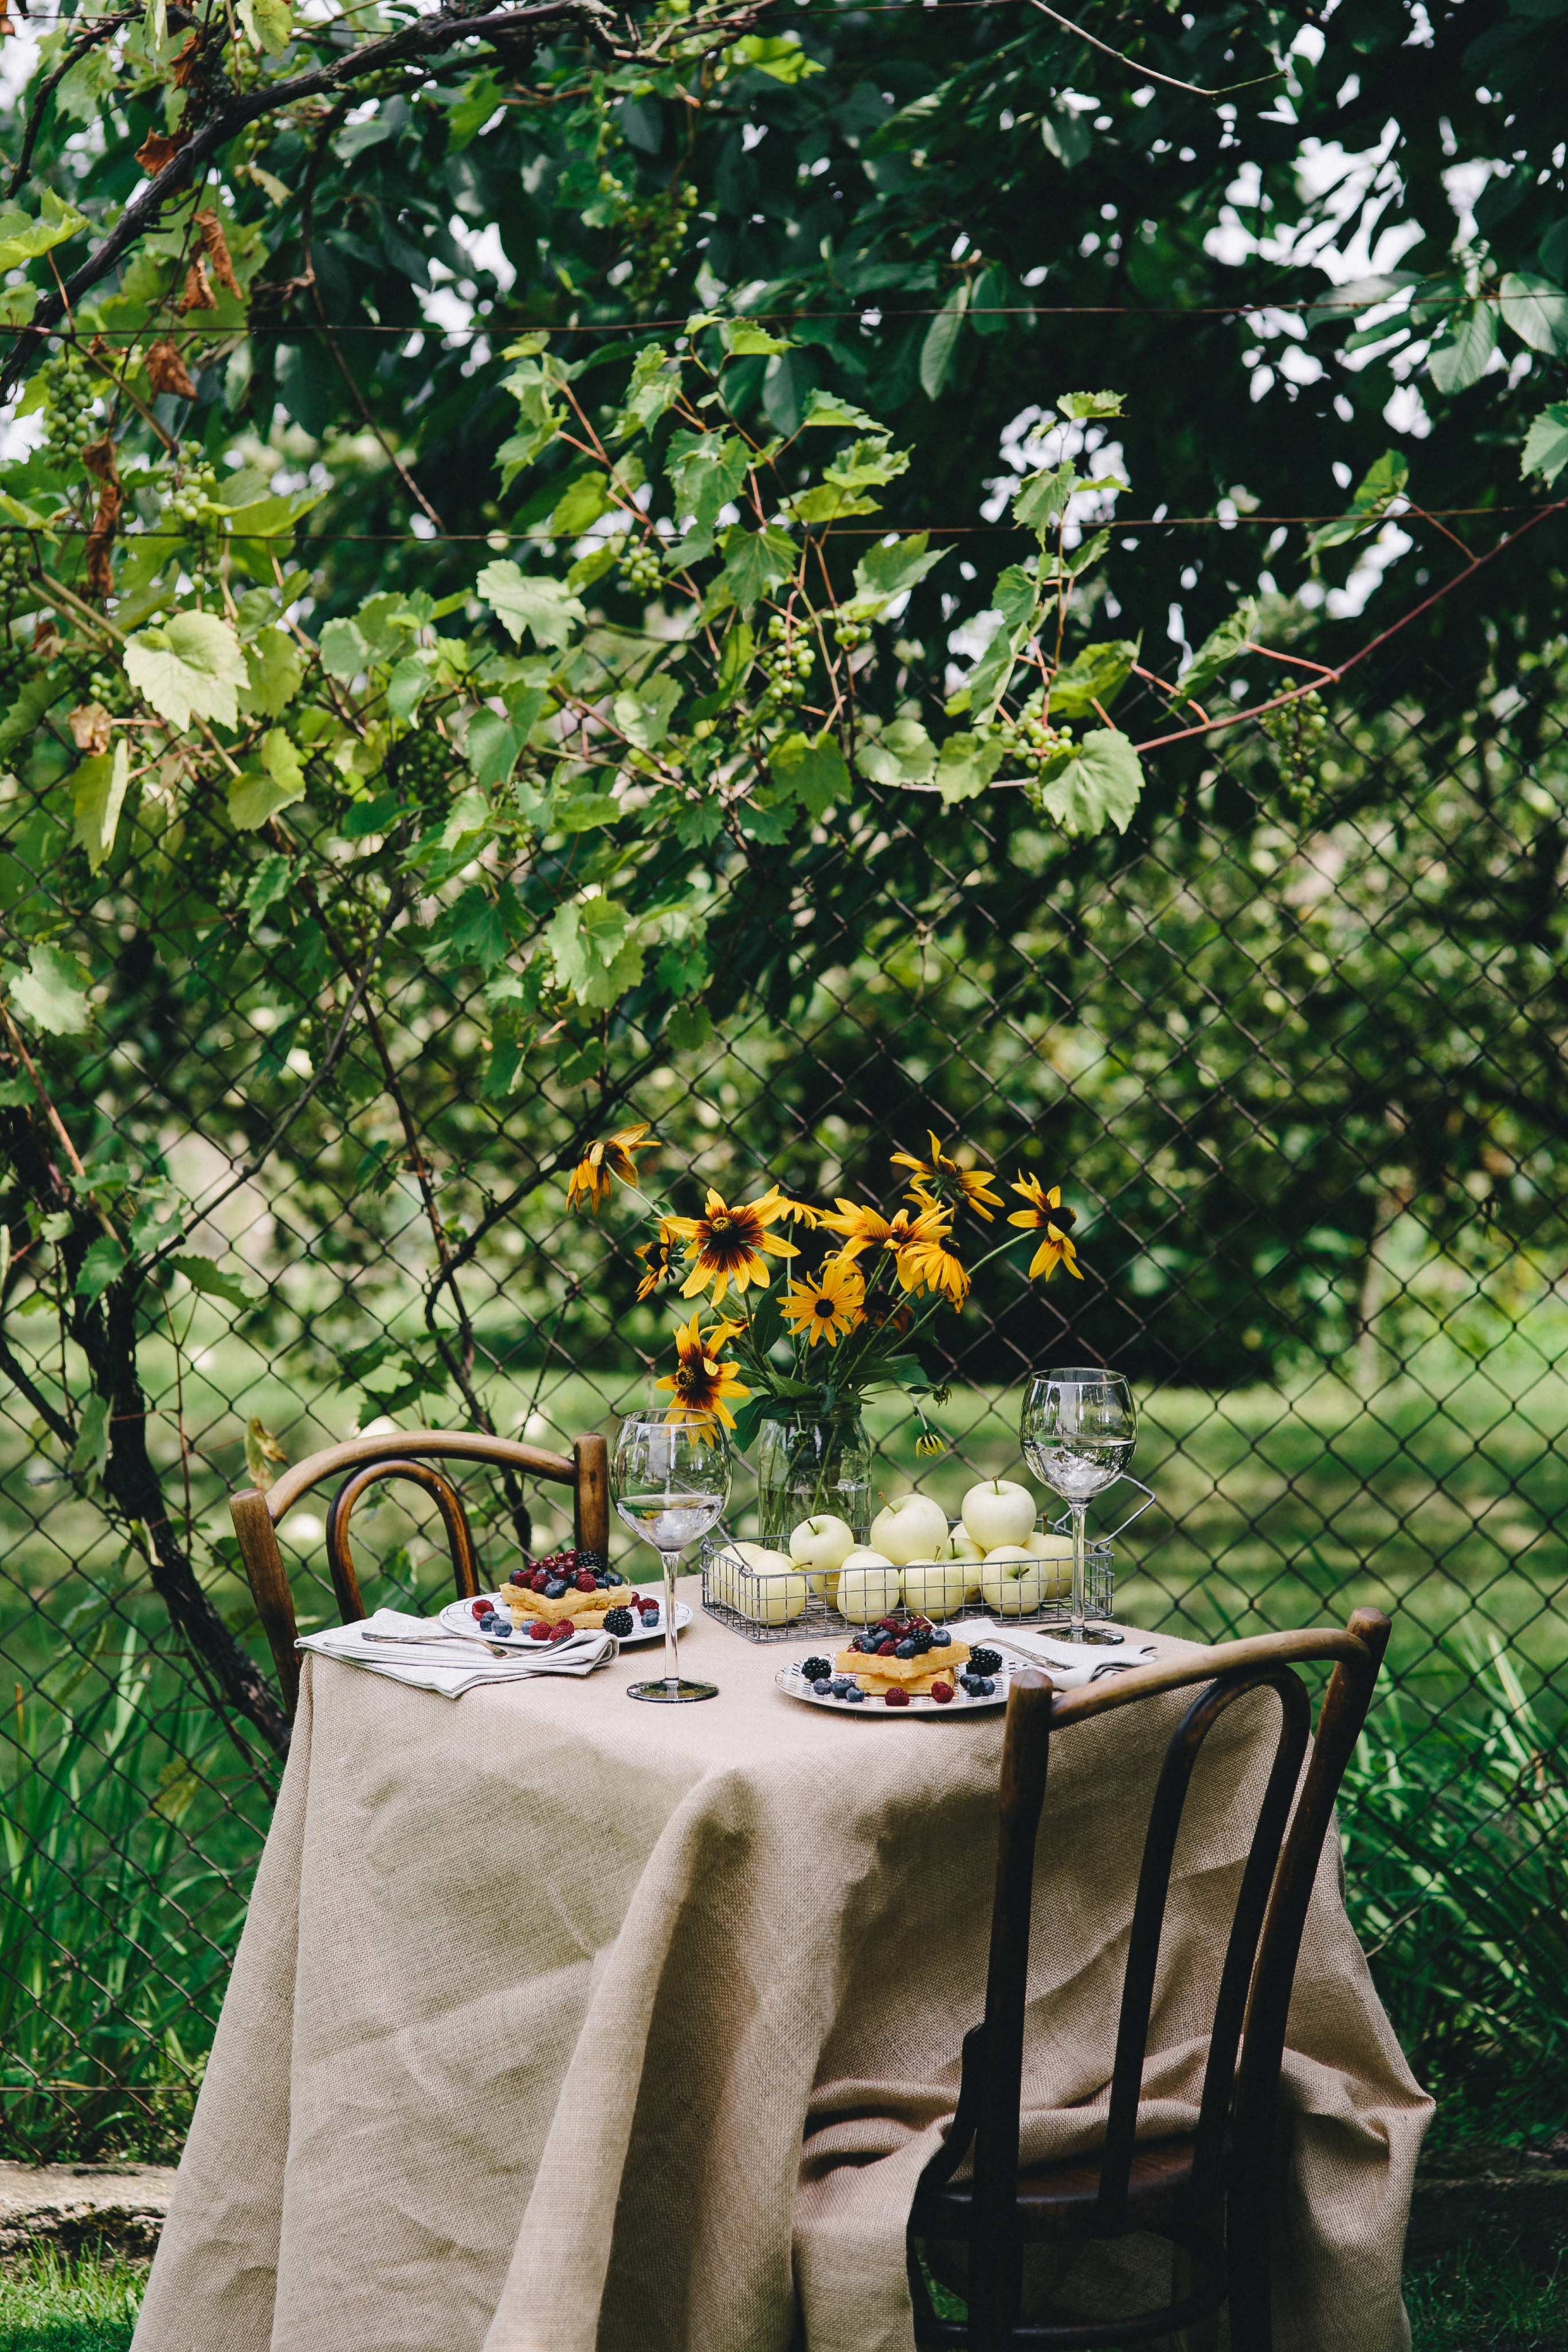 picnic, nature, food, summer, table, serving, breakfast